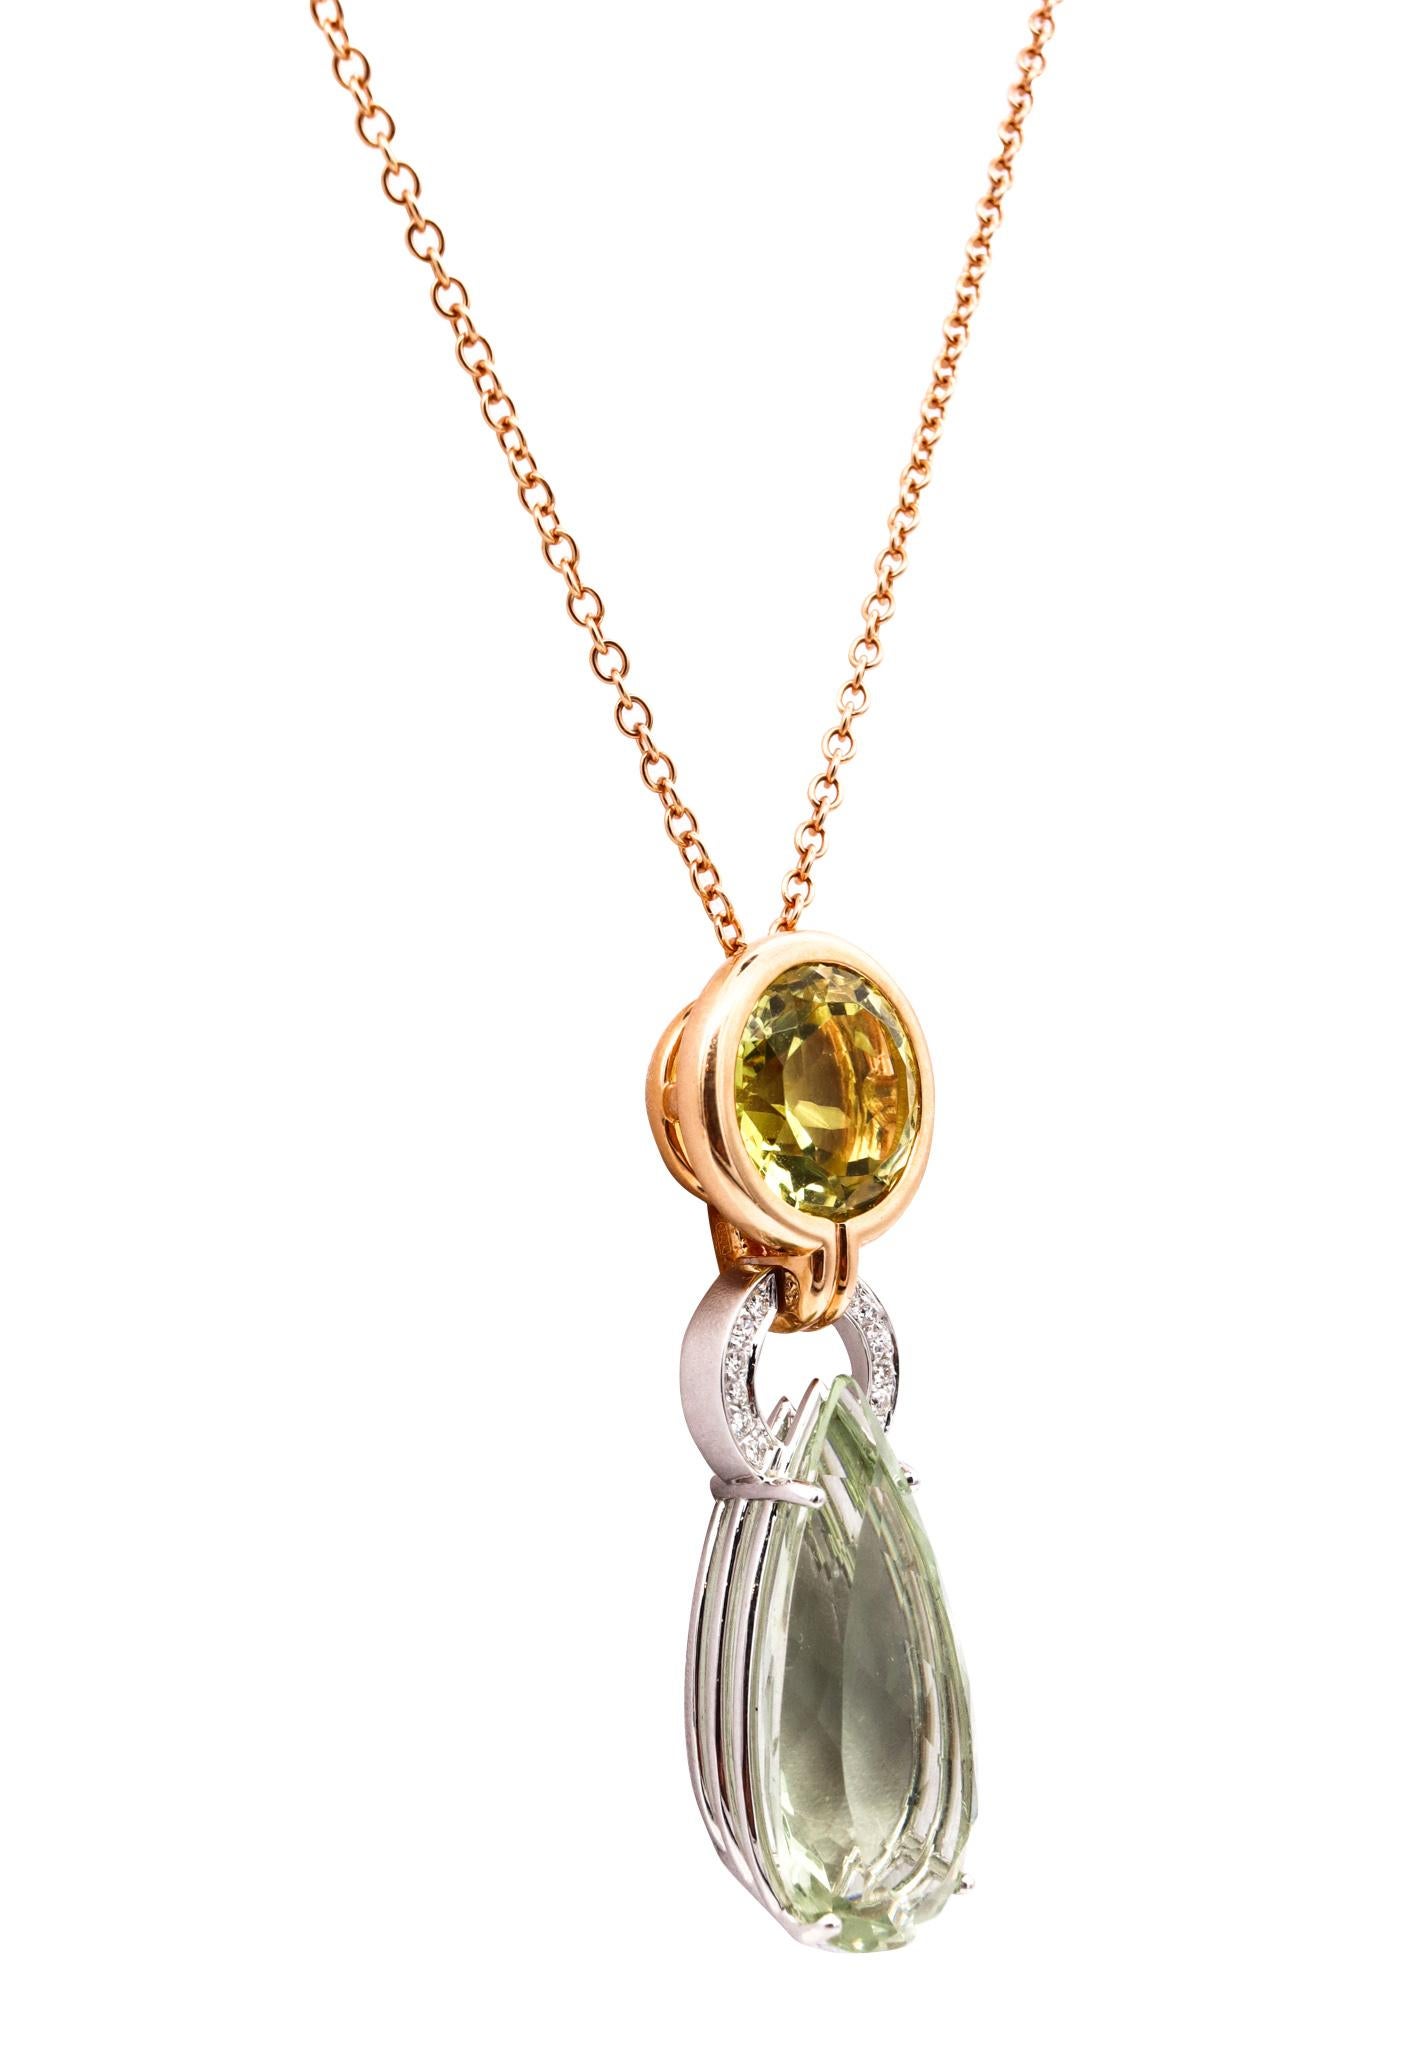 Salavetti Milano Chained Necklace 18Kt Rose Gold 26.85 Cts Diamonds & Gemstones For Sale 3